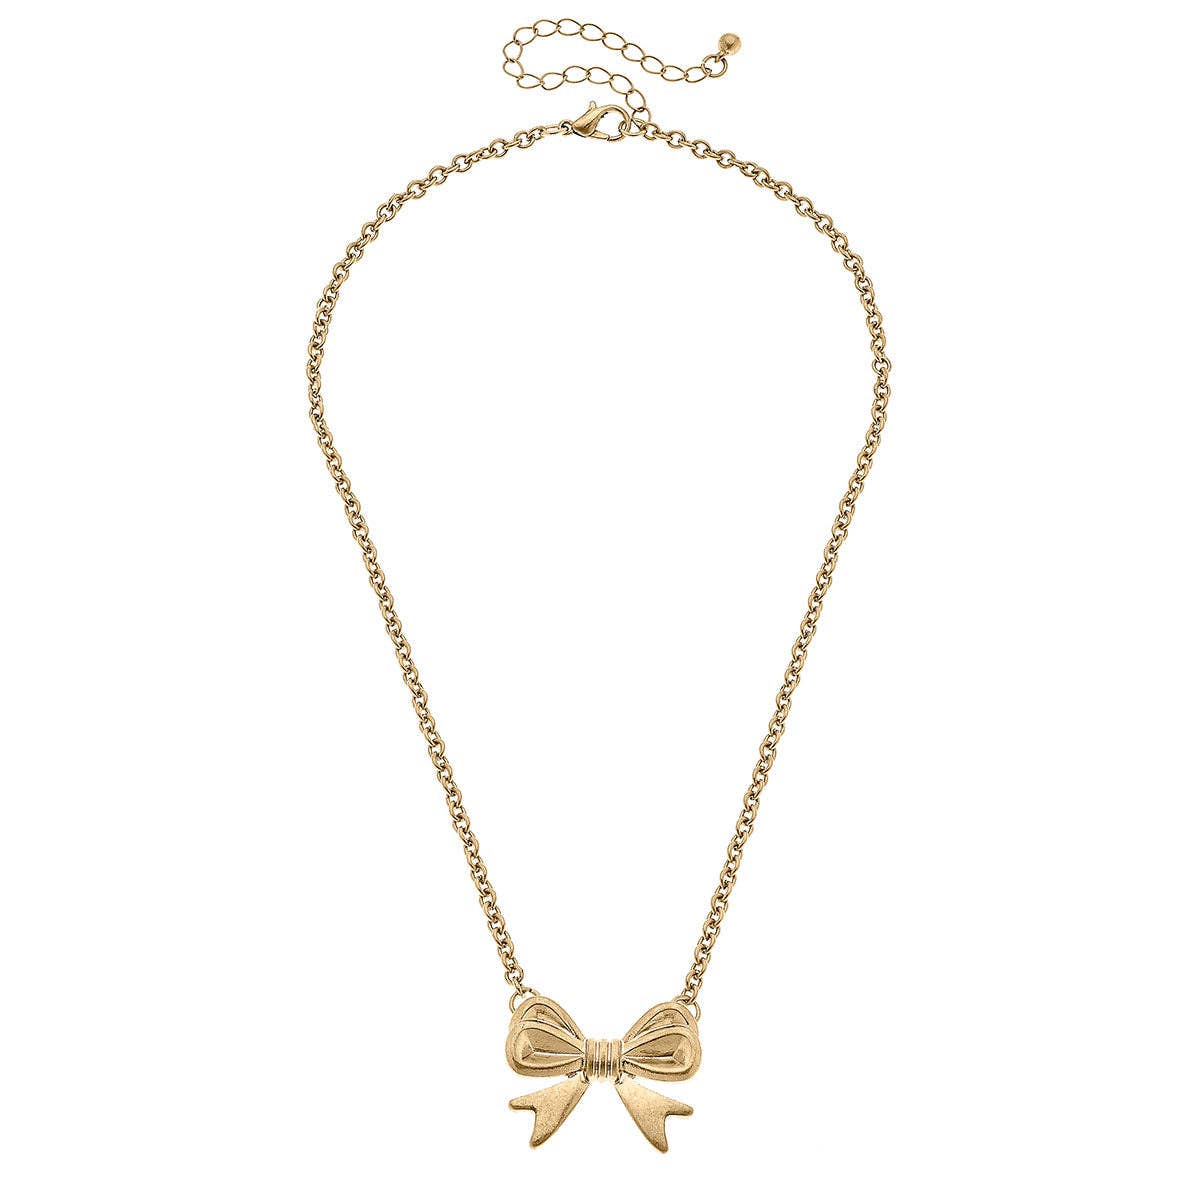 Stephanie Bow Pendant Necklace in Worn Gold